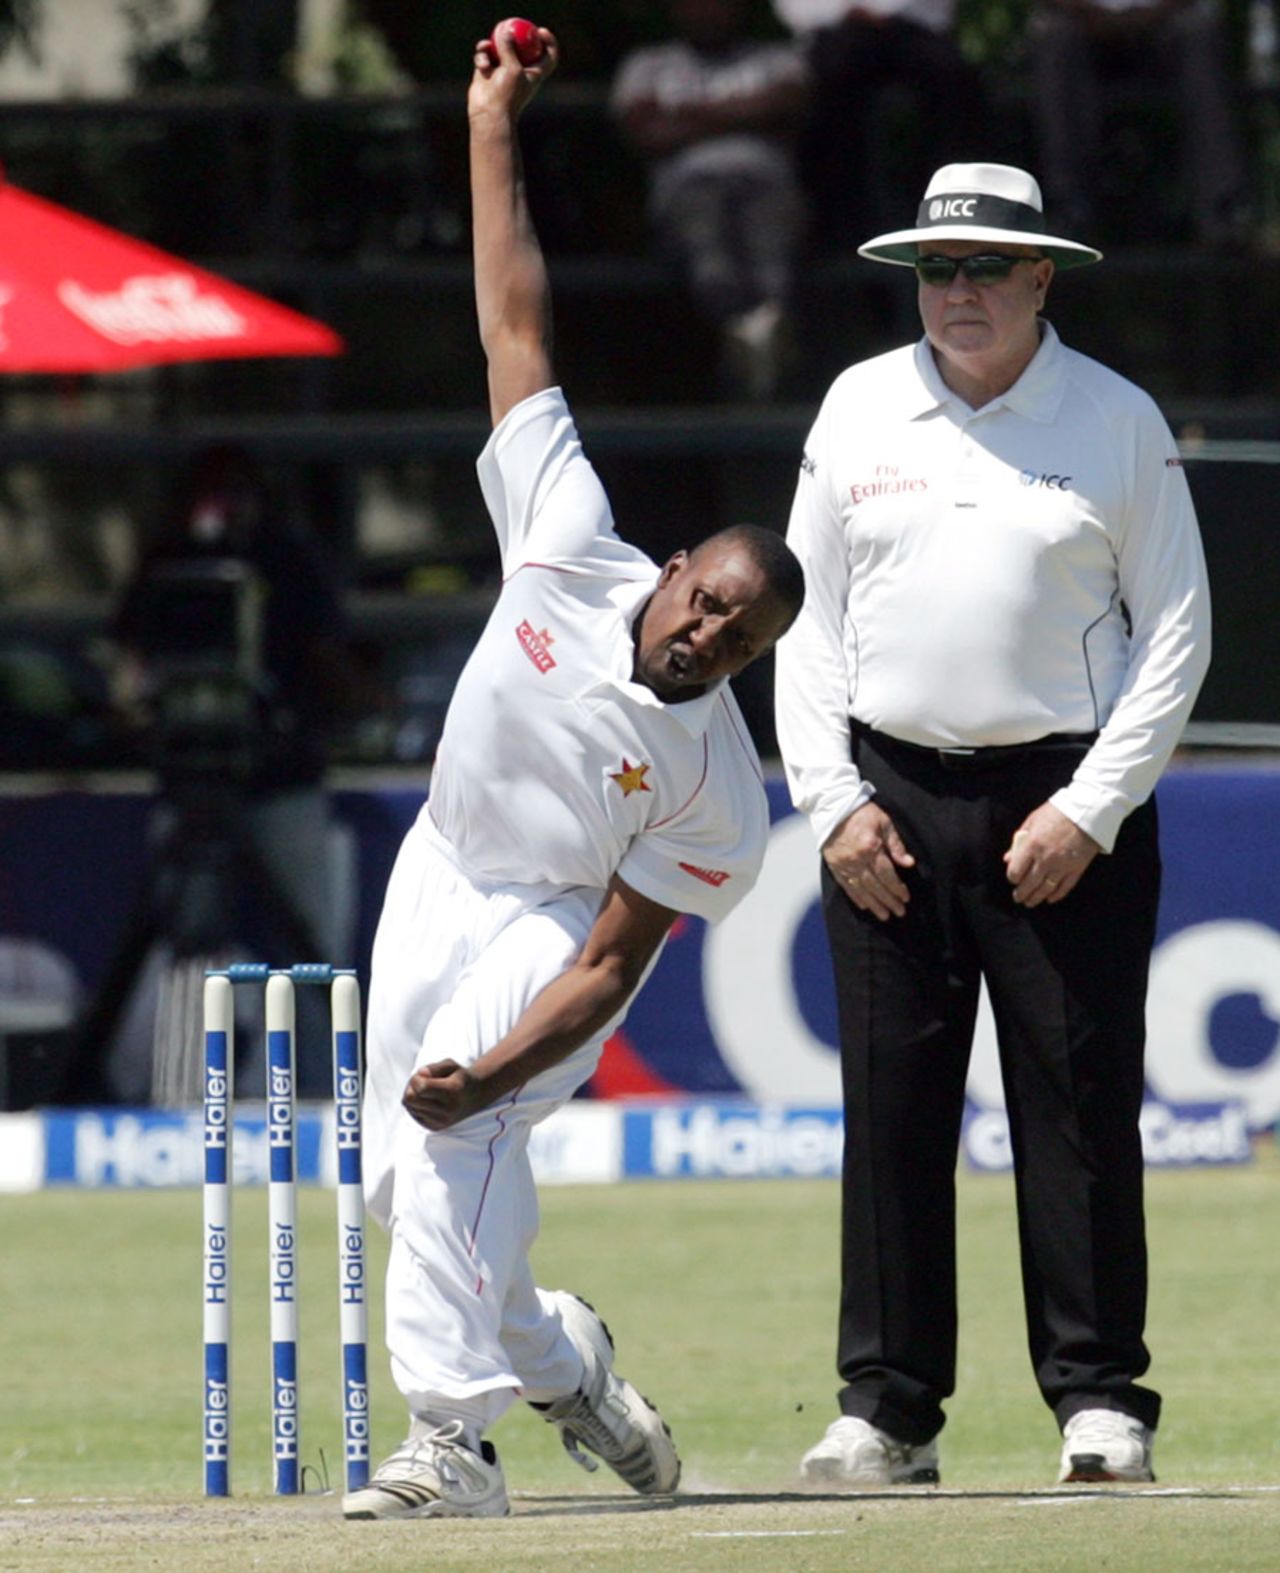 Tinashe Panyangara in his delivery stride, Zimbabwe v Pakistan, 1st Test, 4th day, Harare, September 6, 2013